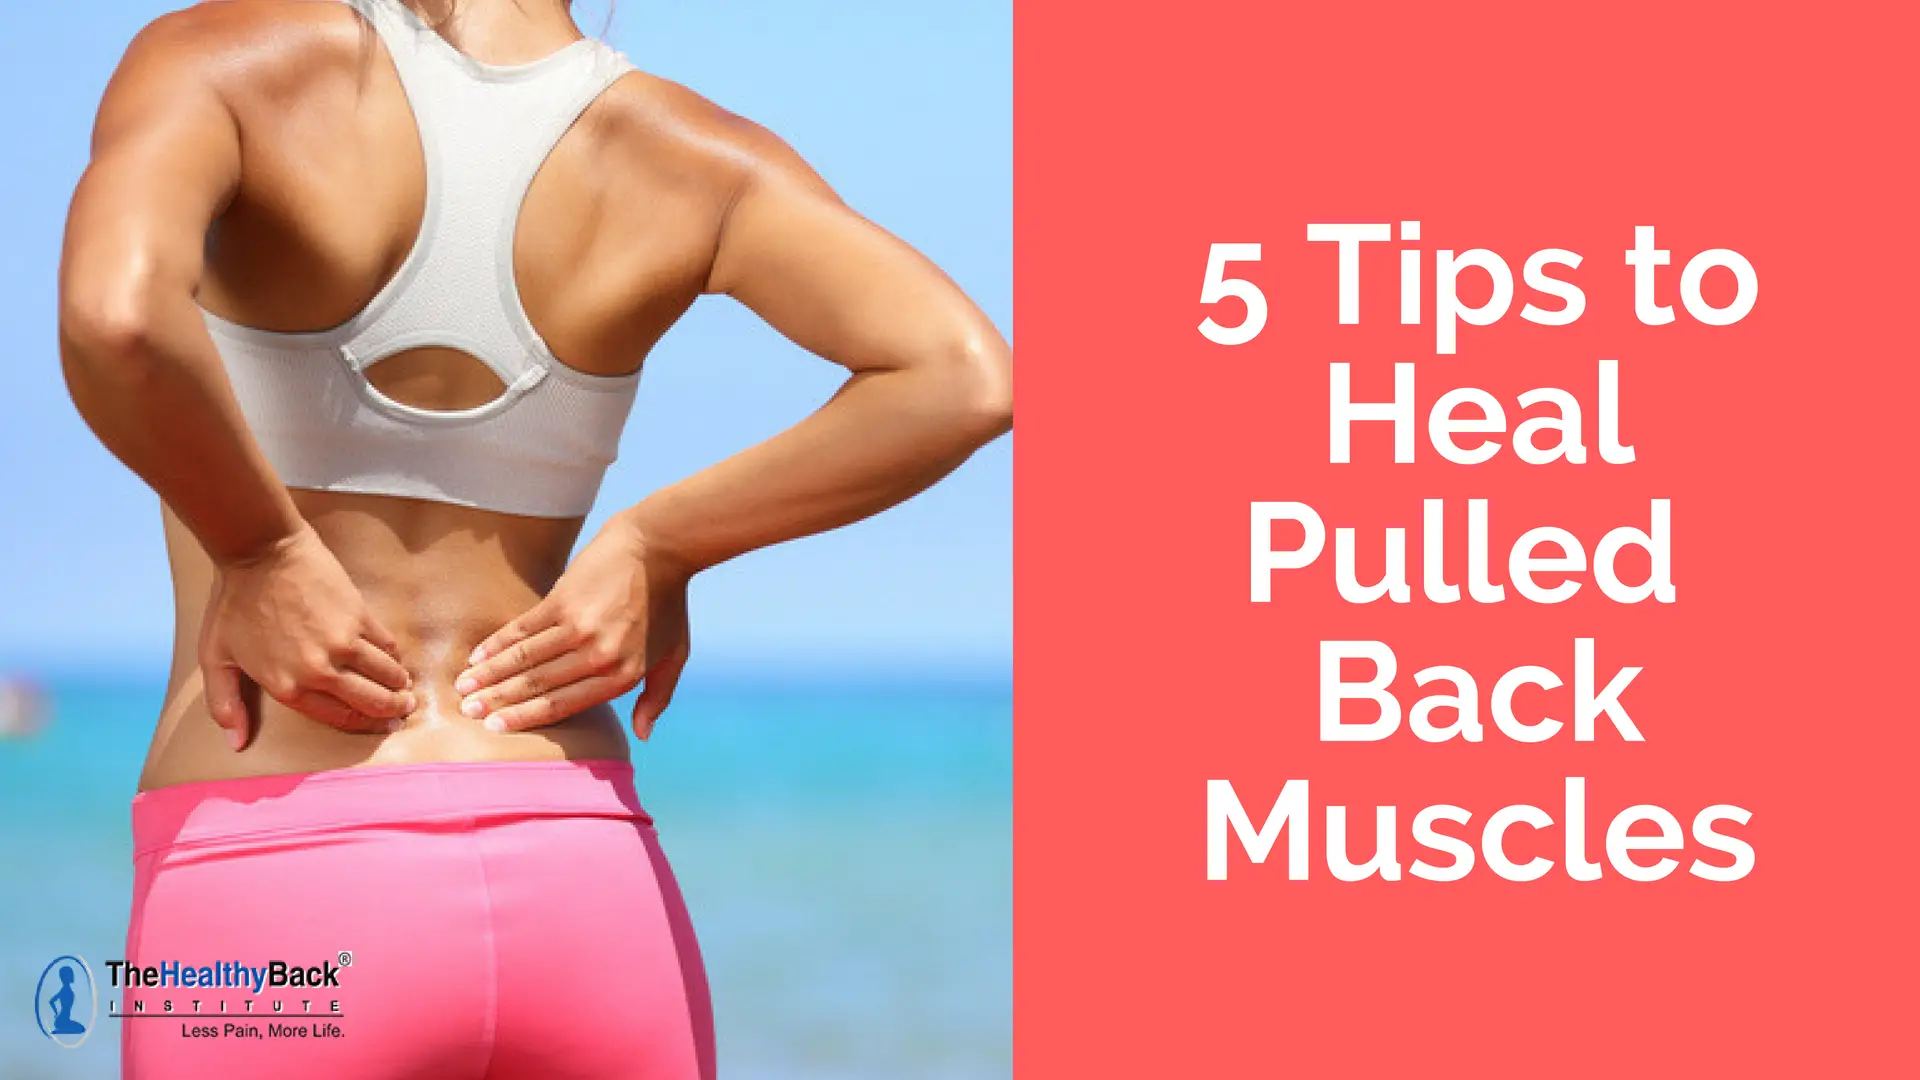 5 Steps to Quickly Recover from Pulled Back Muscles